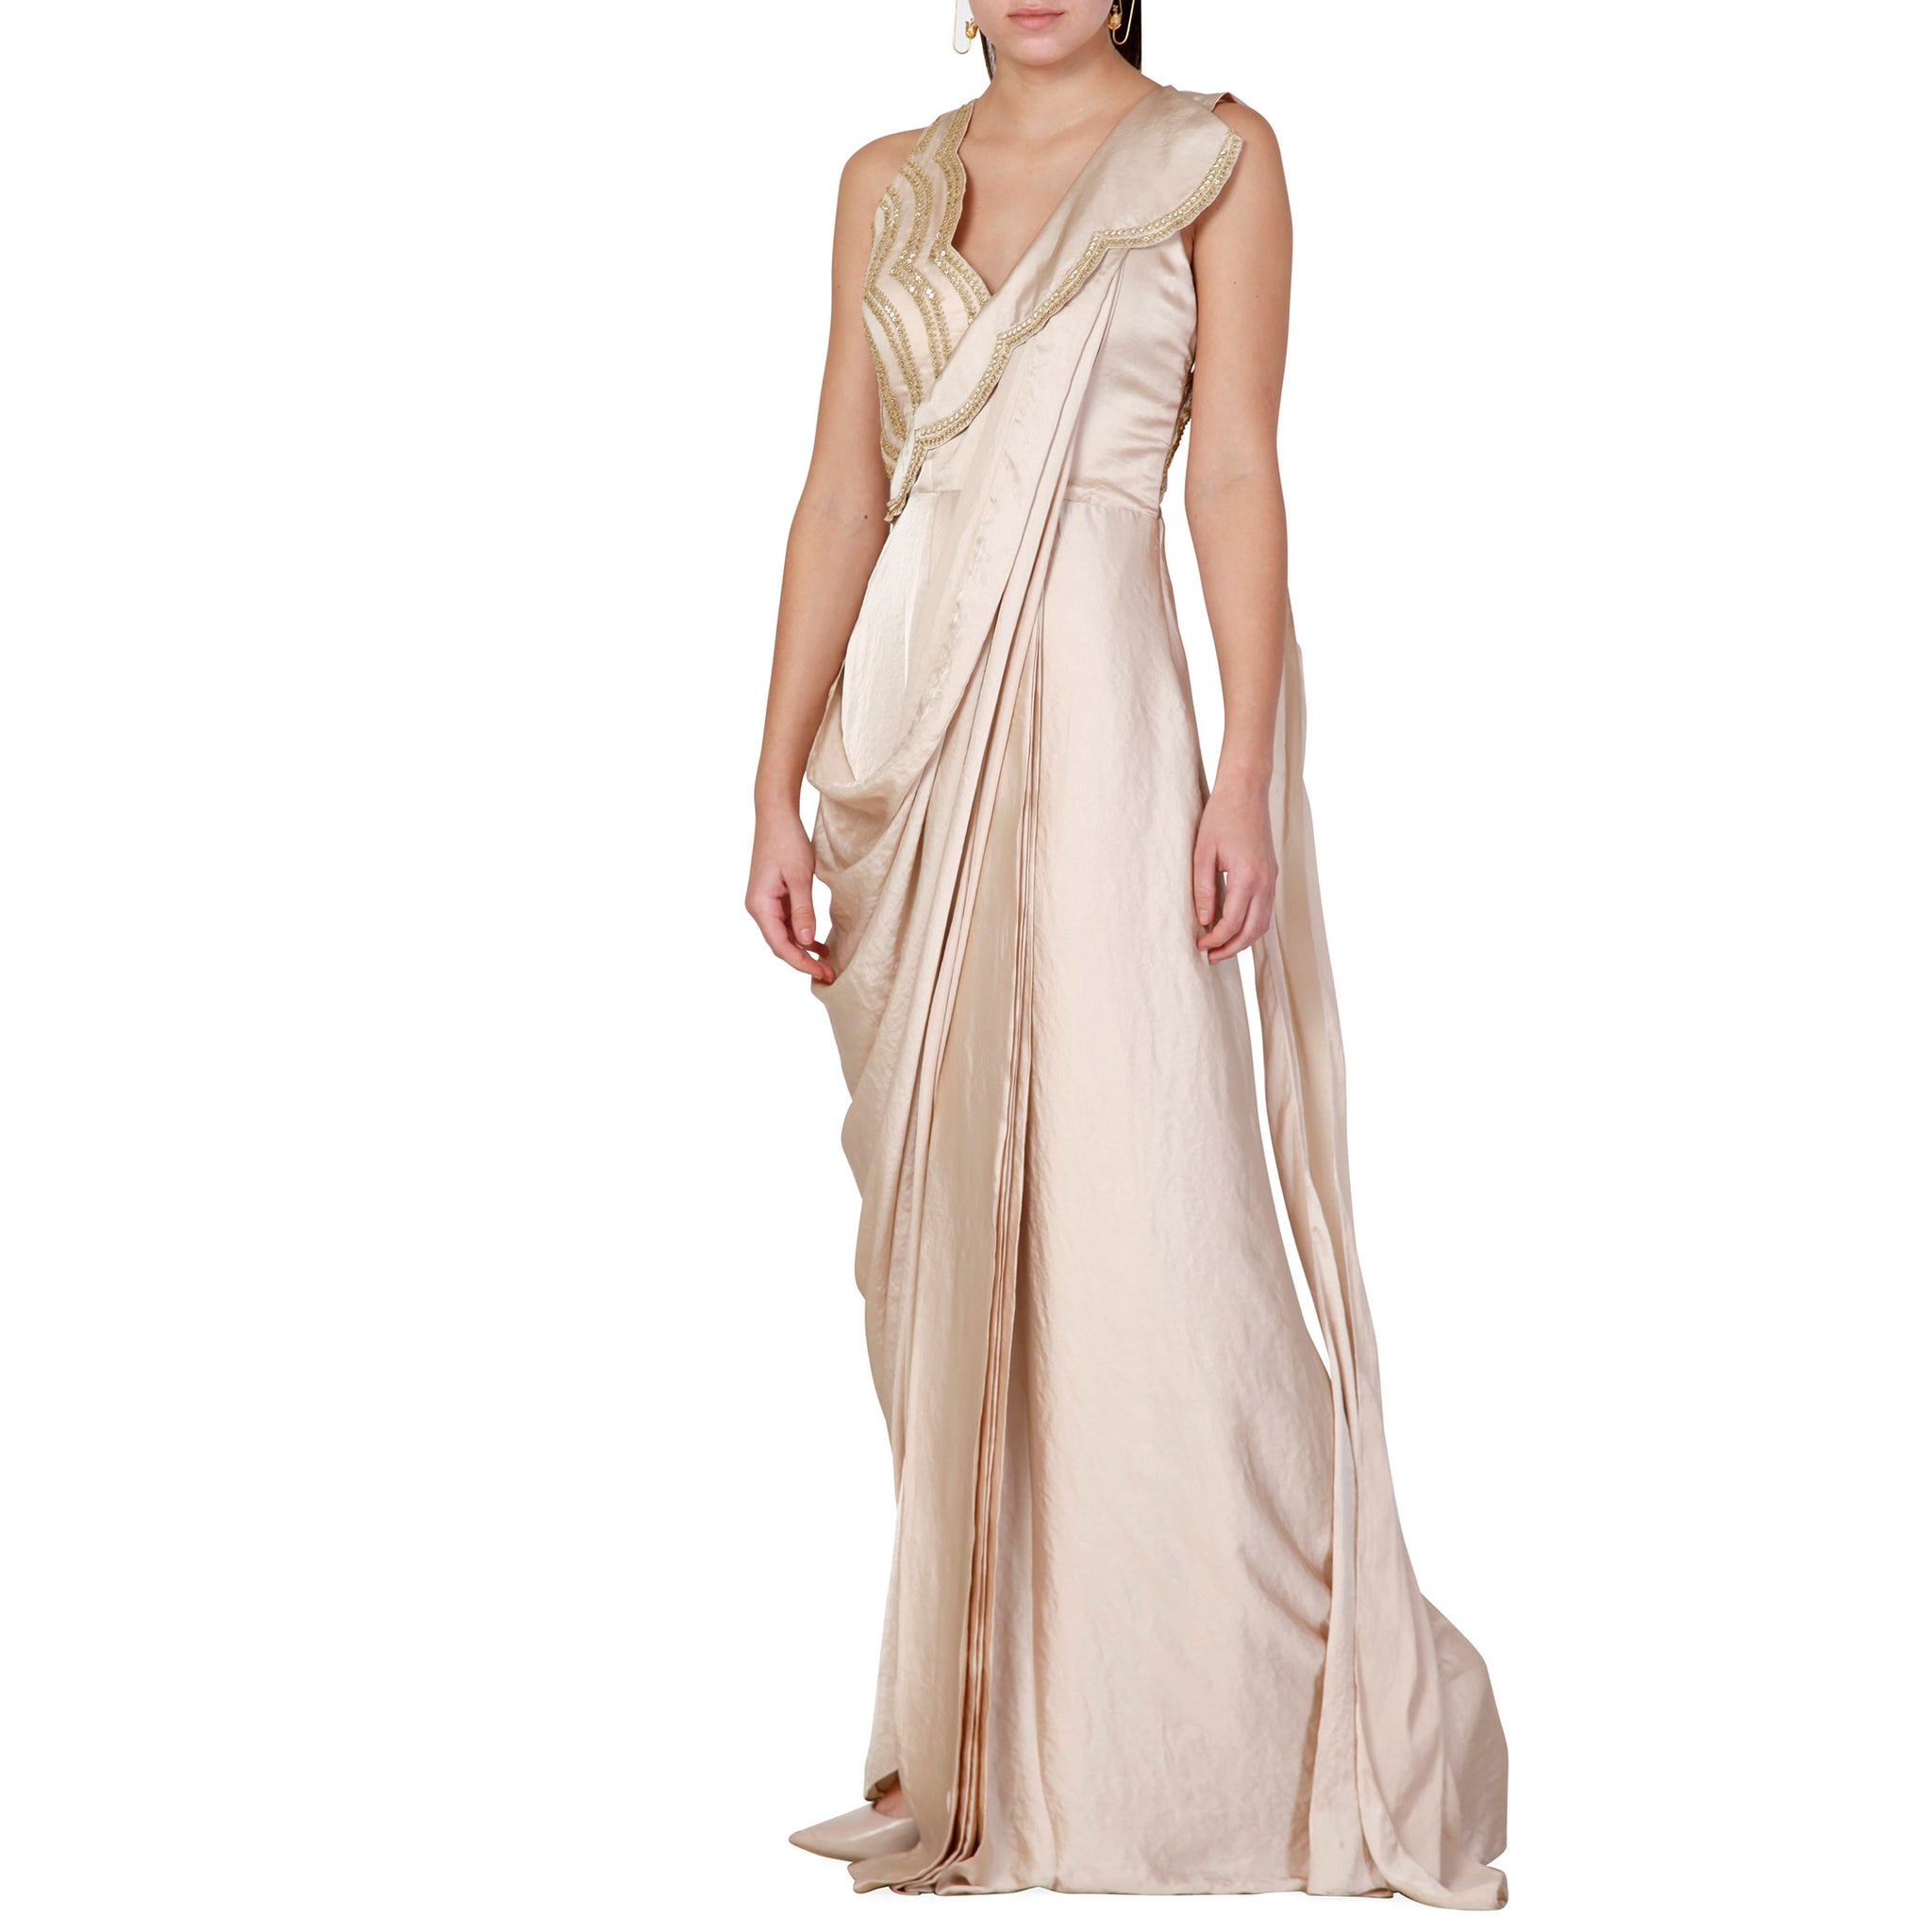 Embroidered Pre-Draped Sari with Embroidered Lapel Detail